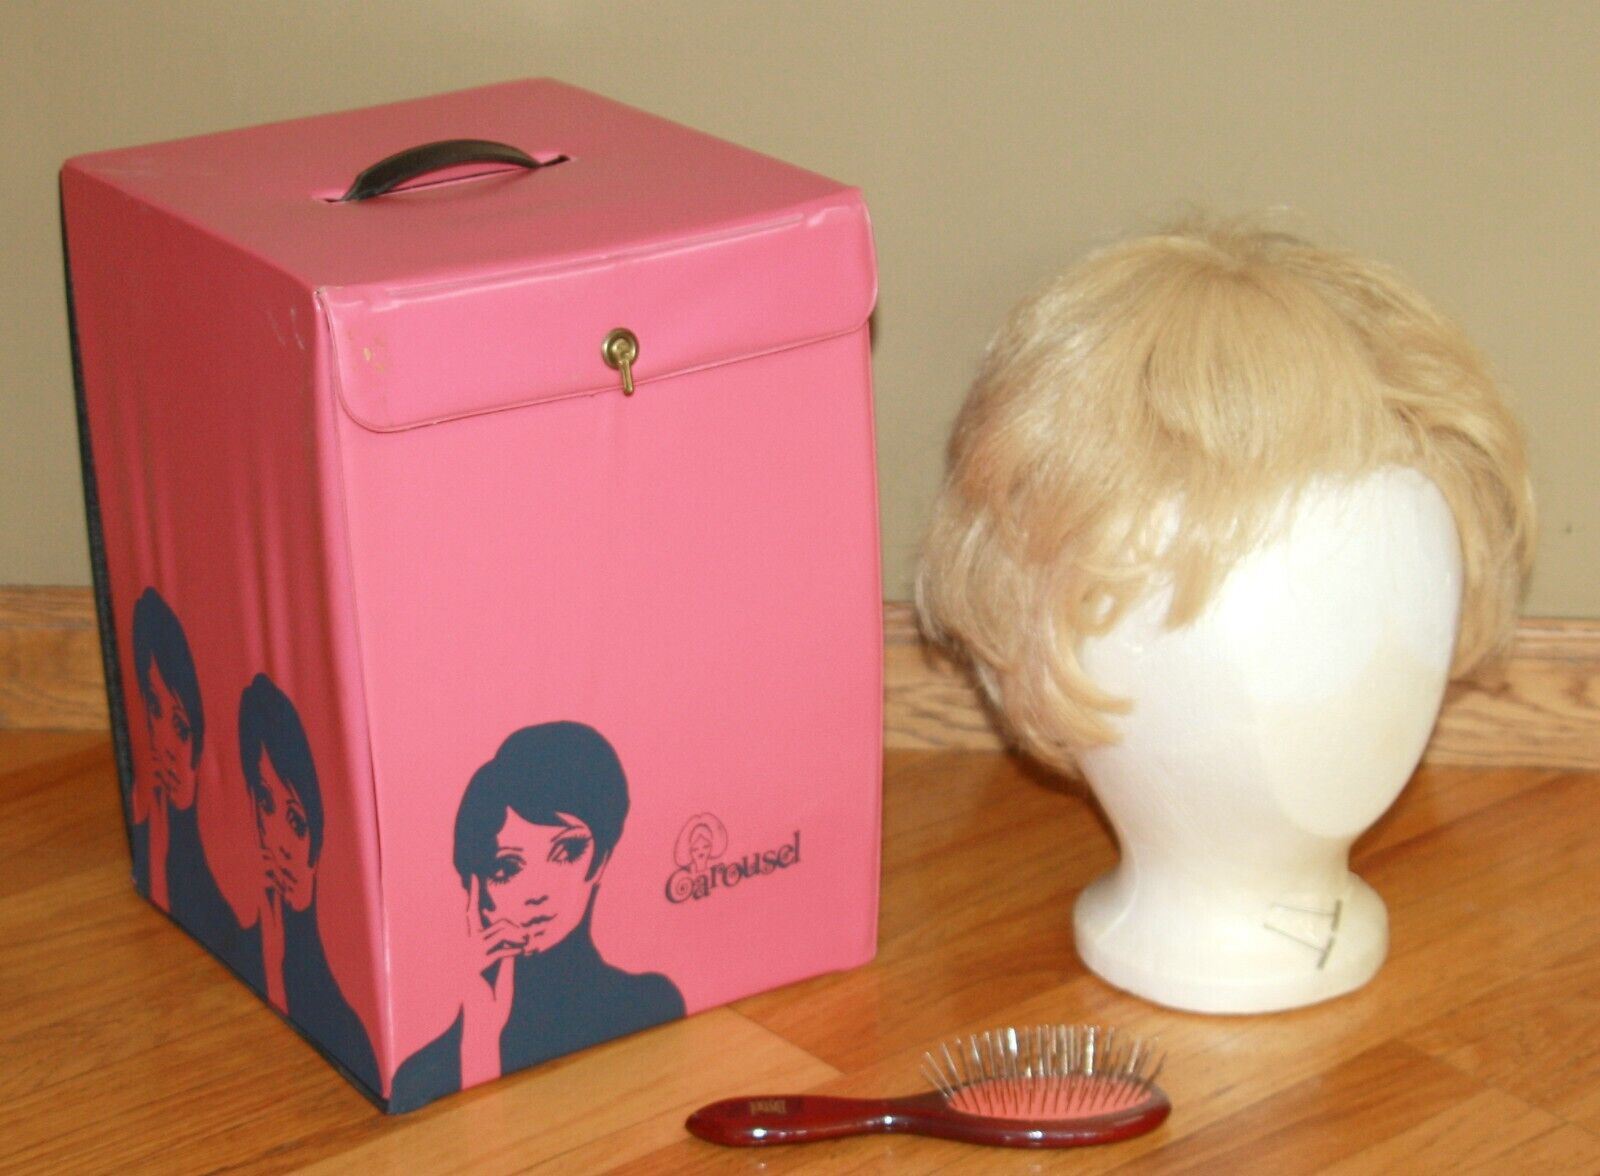 Vintage 1960s Carousel Wig in pink mod vinyl carry case box